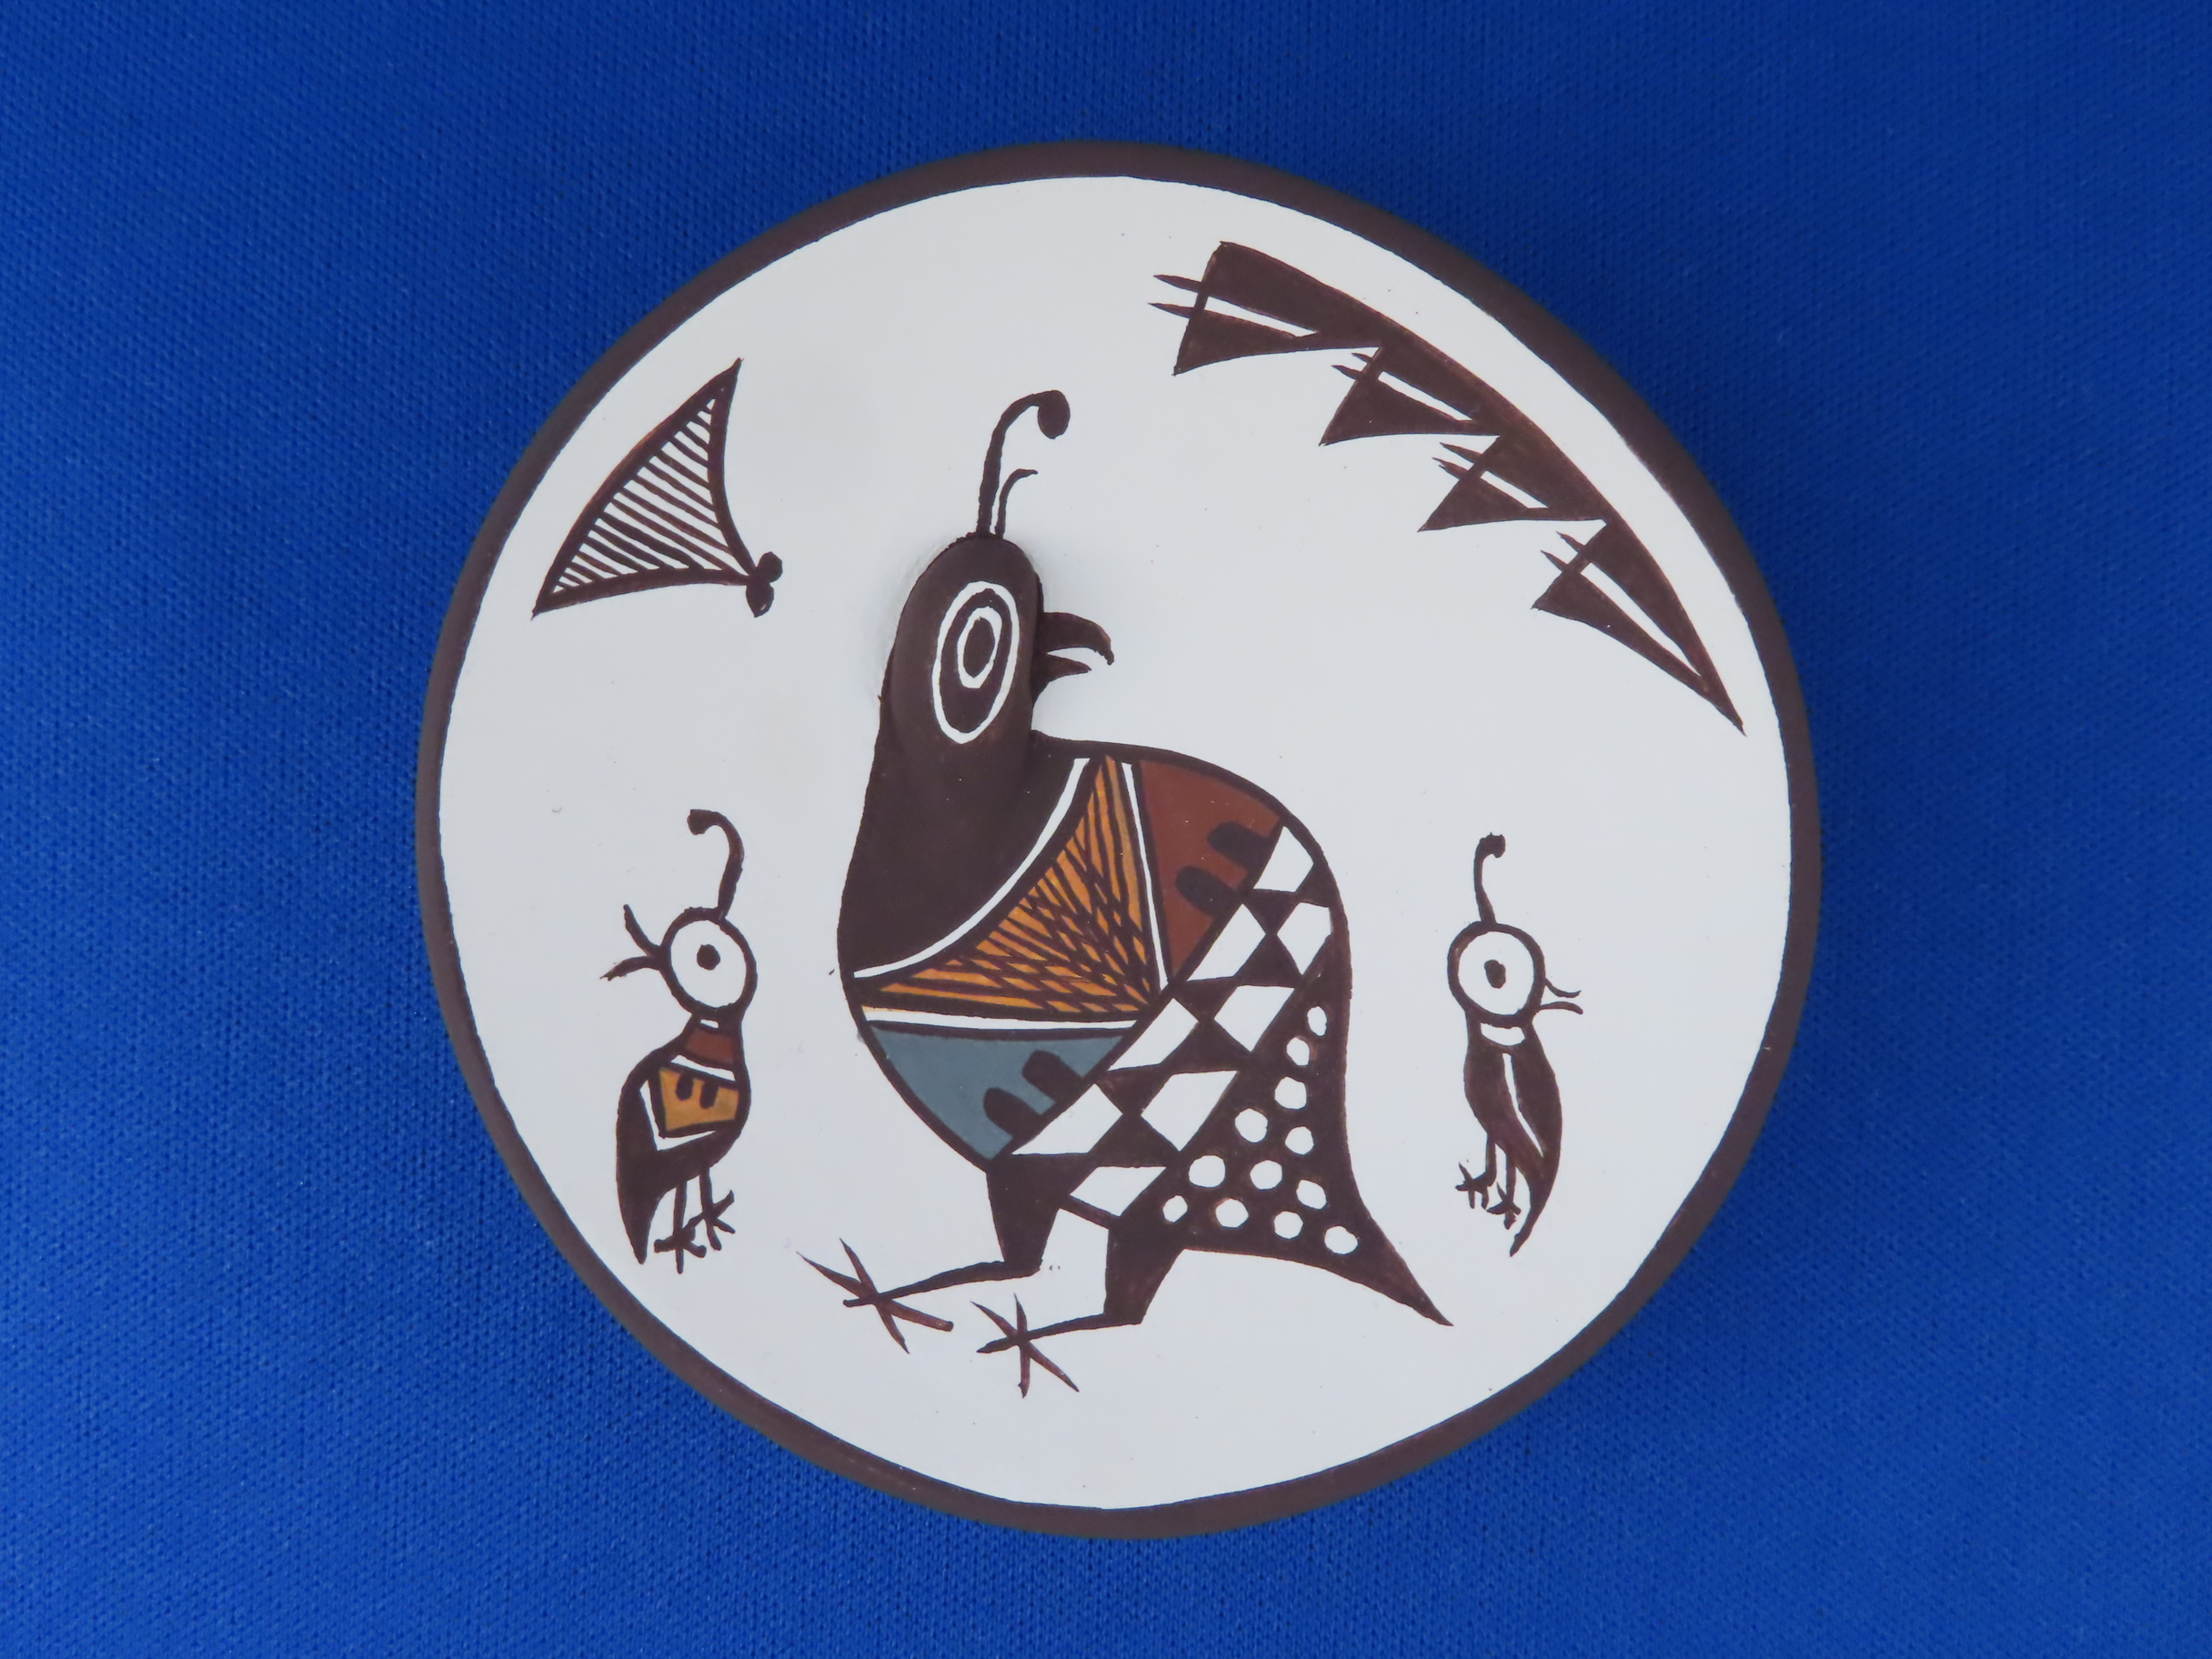 Small Acoma Pottery Plate with Quail Design by Carolyn Concho FOR SALE $150-